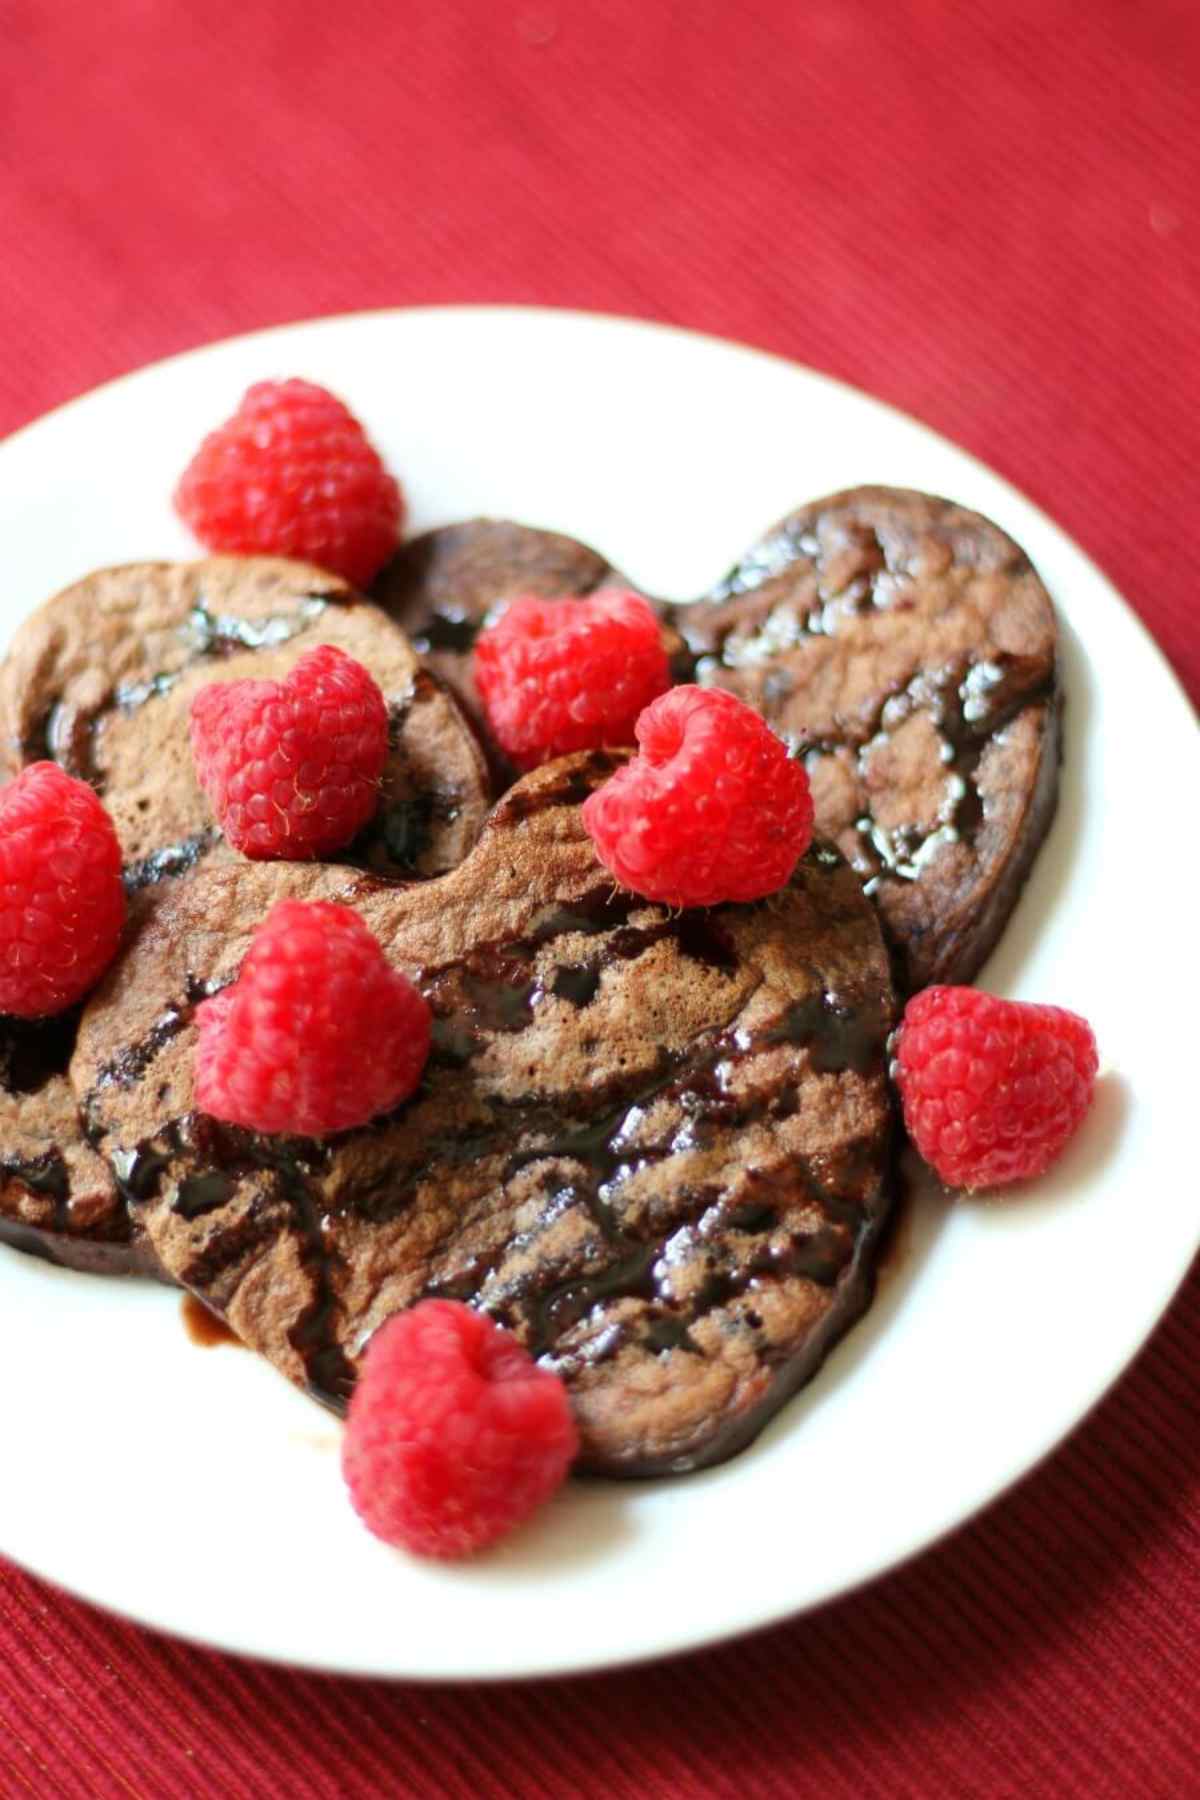 Plate full of heart shaped brown chocolate pancakes with fresh raspberries.